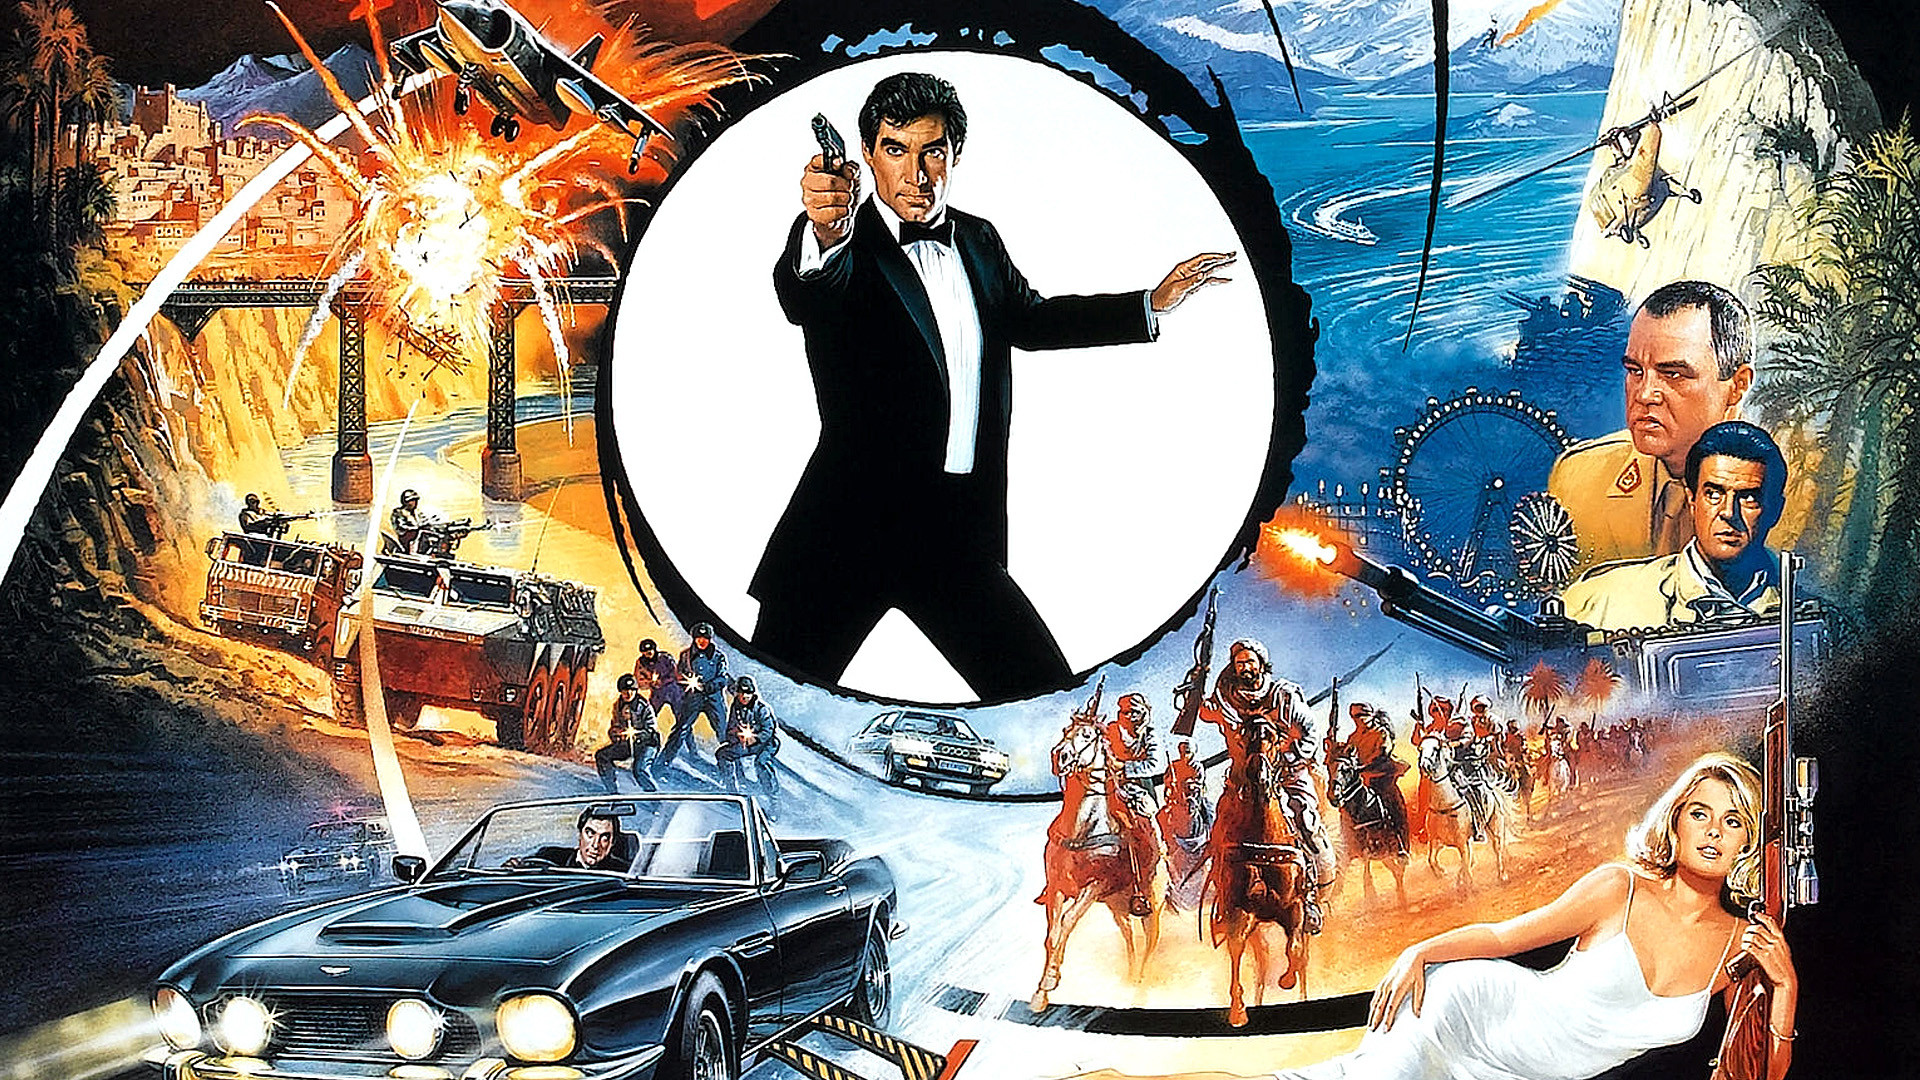 Amazing The Living Daylights Pictures & Backgrounds